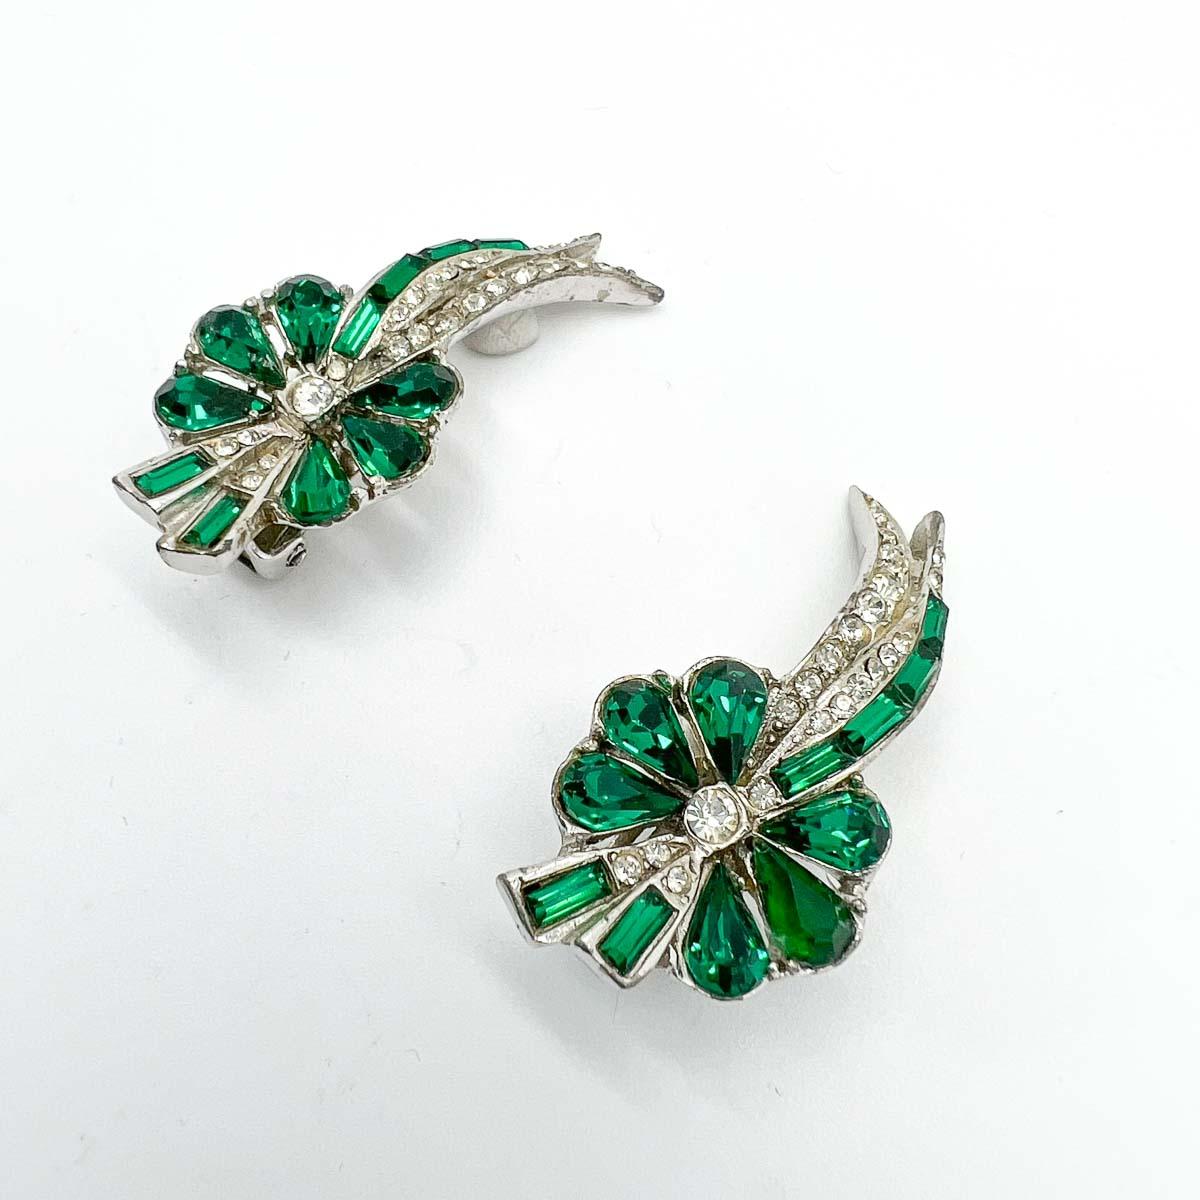 A delightful pair of original 1950s Vintage Emerald Paste Floral Earrings. Crafted with fancy cut emerald pastes in baguette and pear cuts, these are a beautiful example of mid-century jewellery and will prove eternally elegant.

An unsigned beauty.